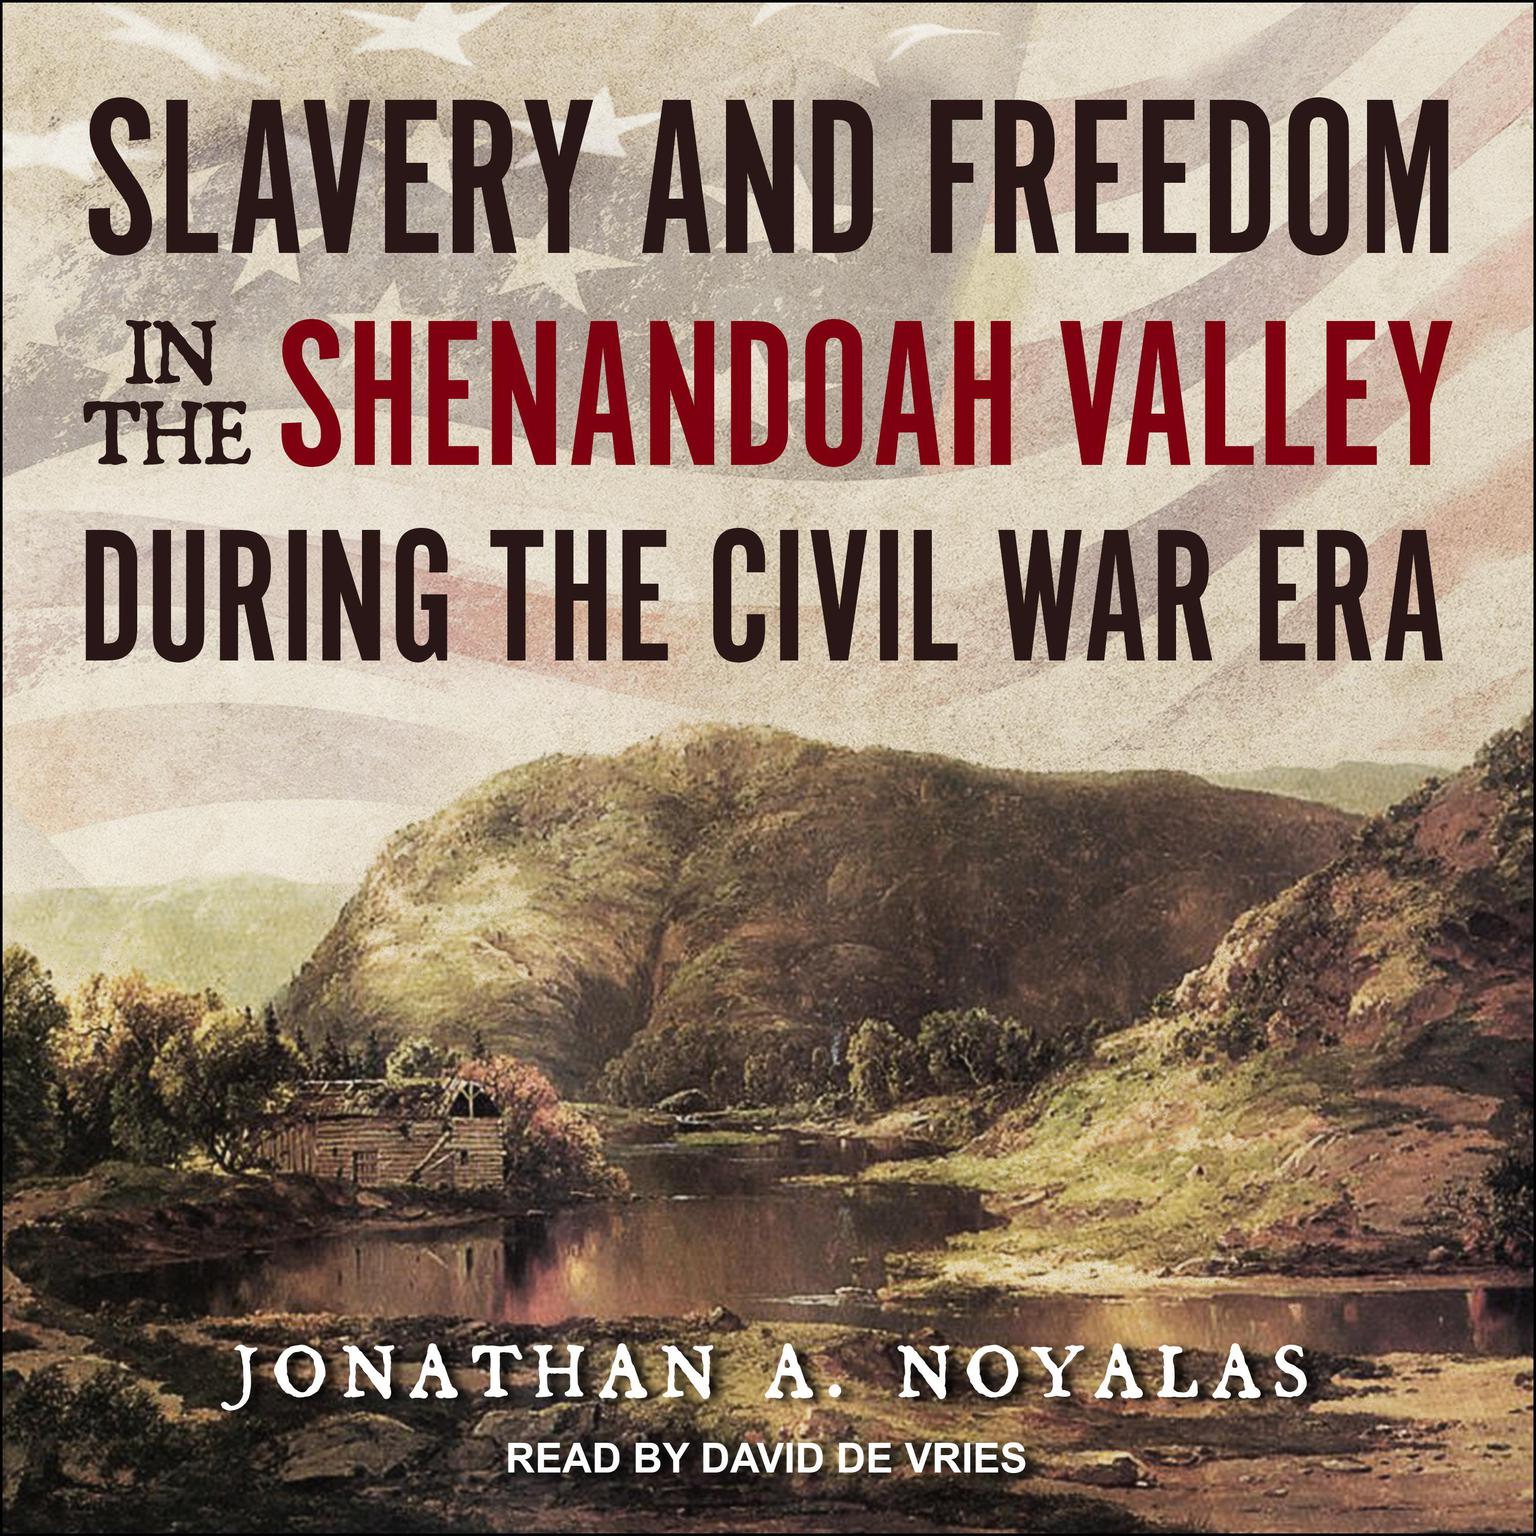 Slavery and Freedom in the Shenandoah Valley during the Civil War Era Audiobook, by Jonathan A. Noyalas